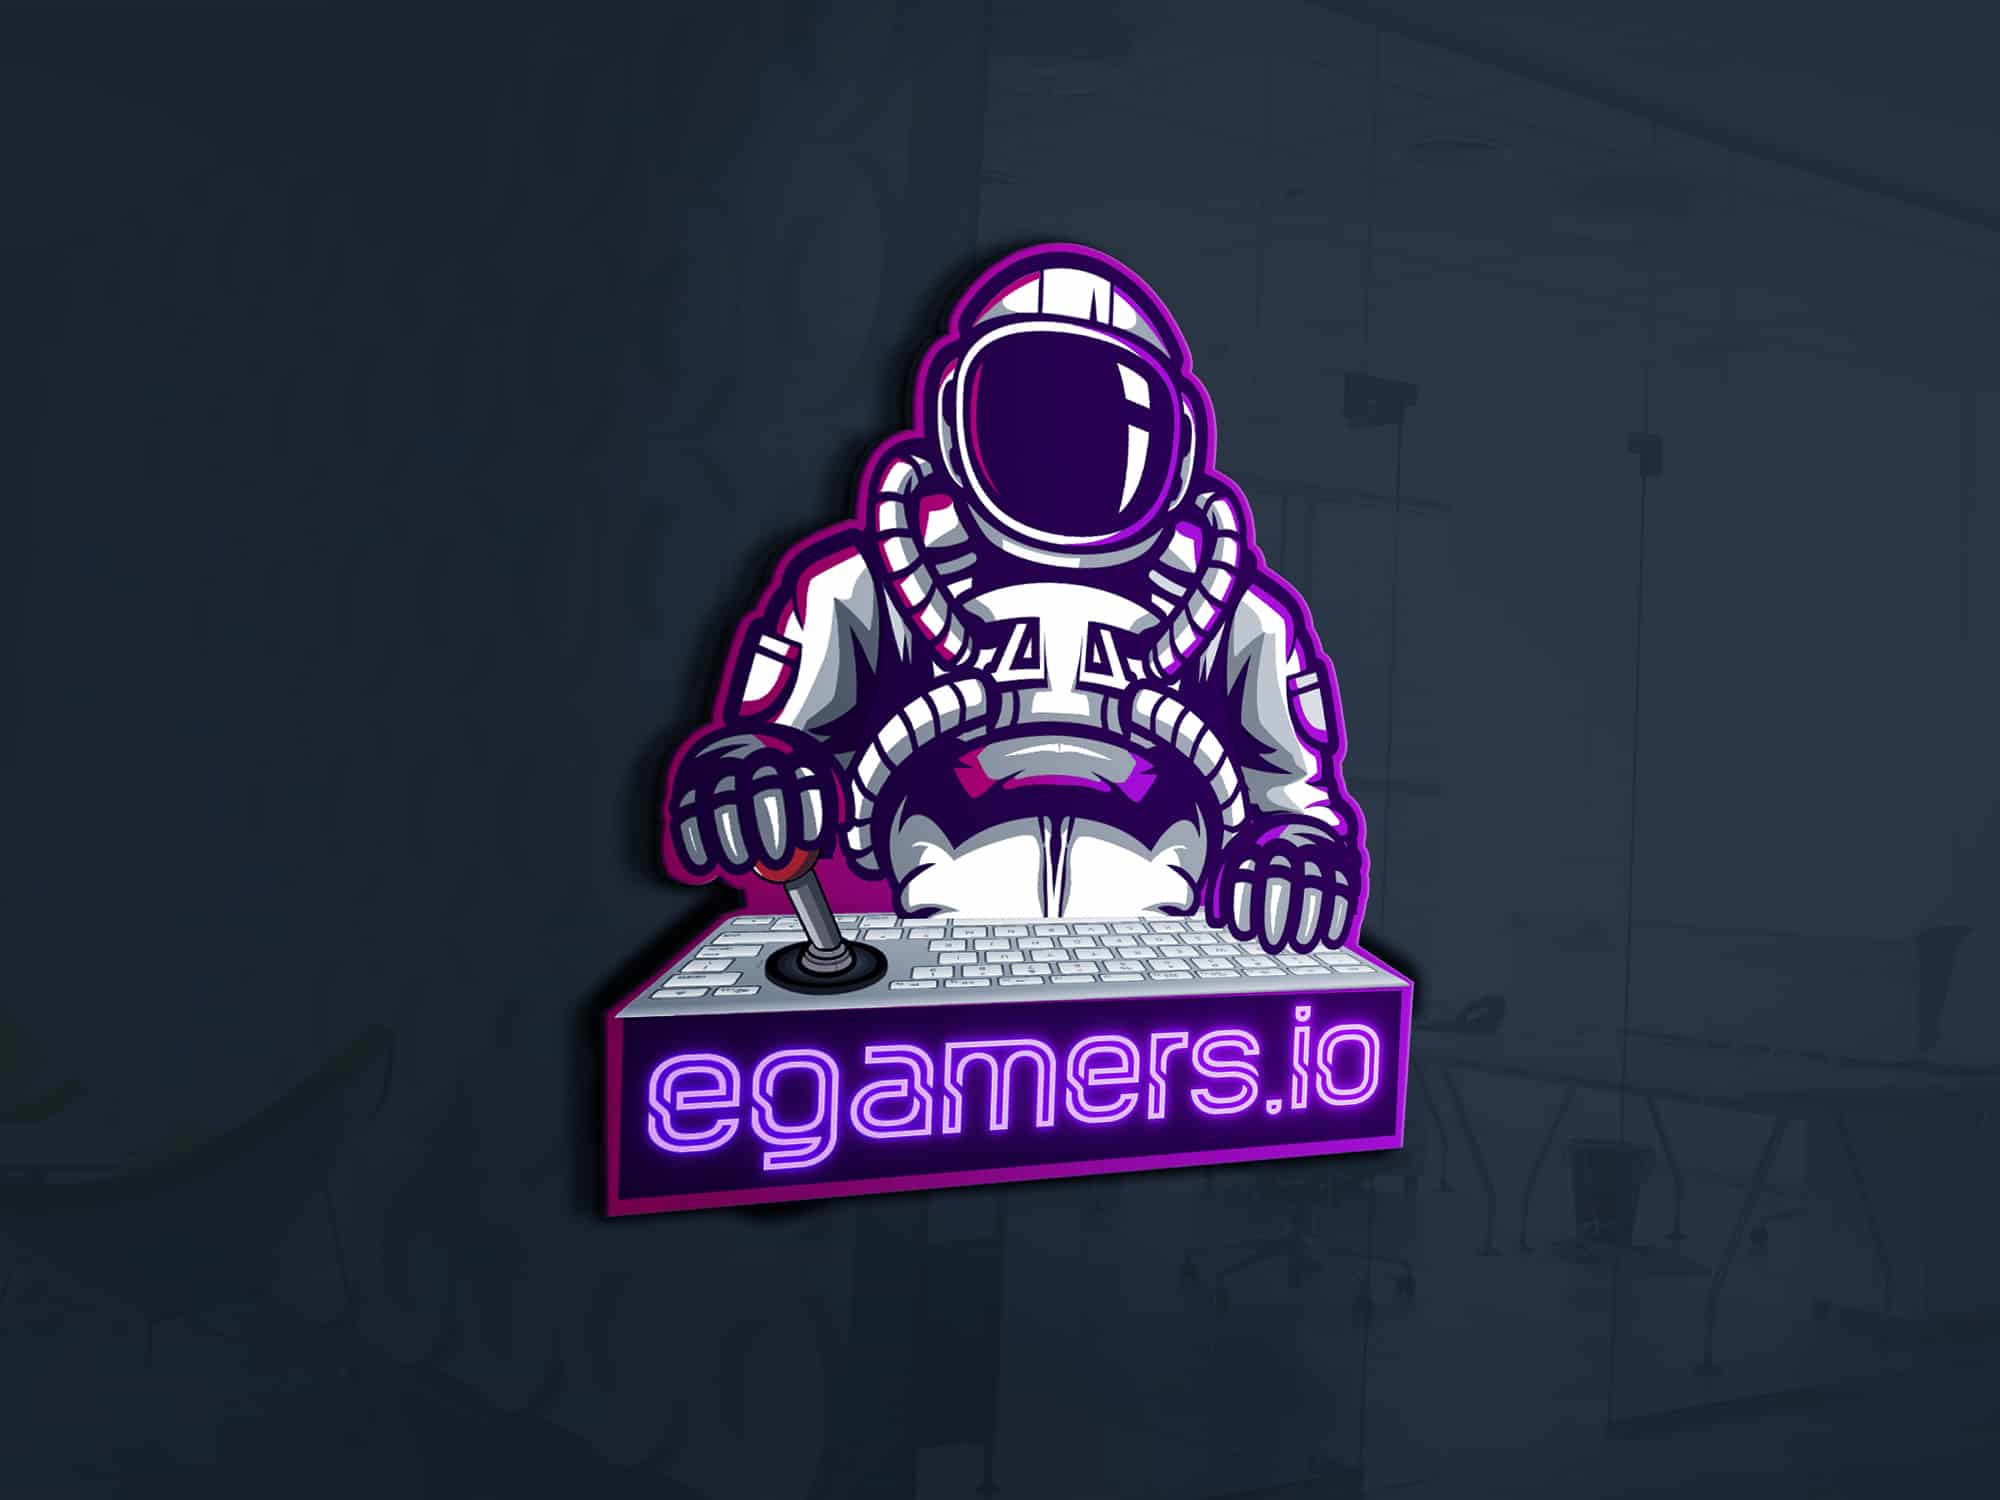 egamers.io Play to earn games NFT Gaming Portal